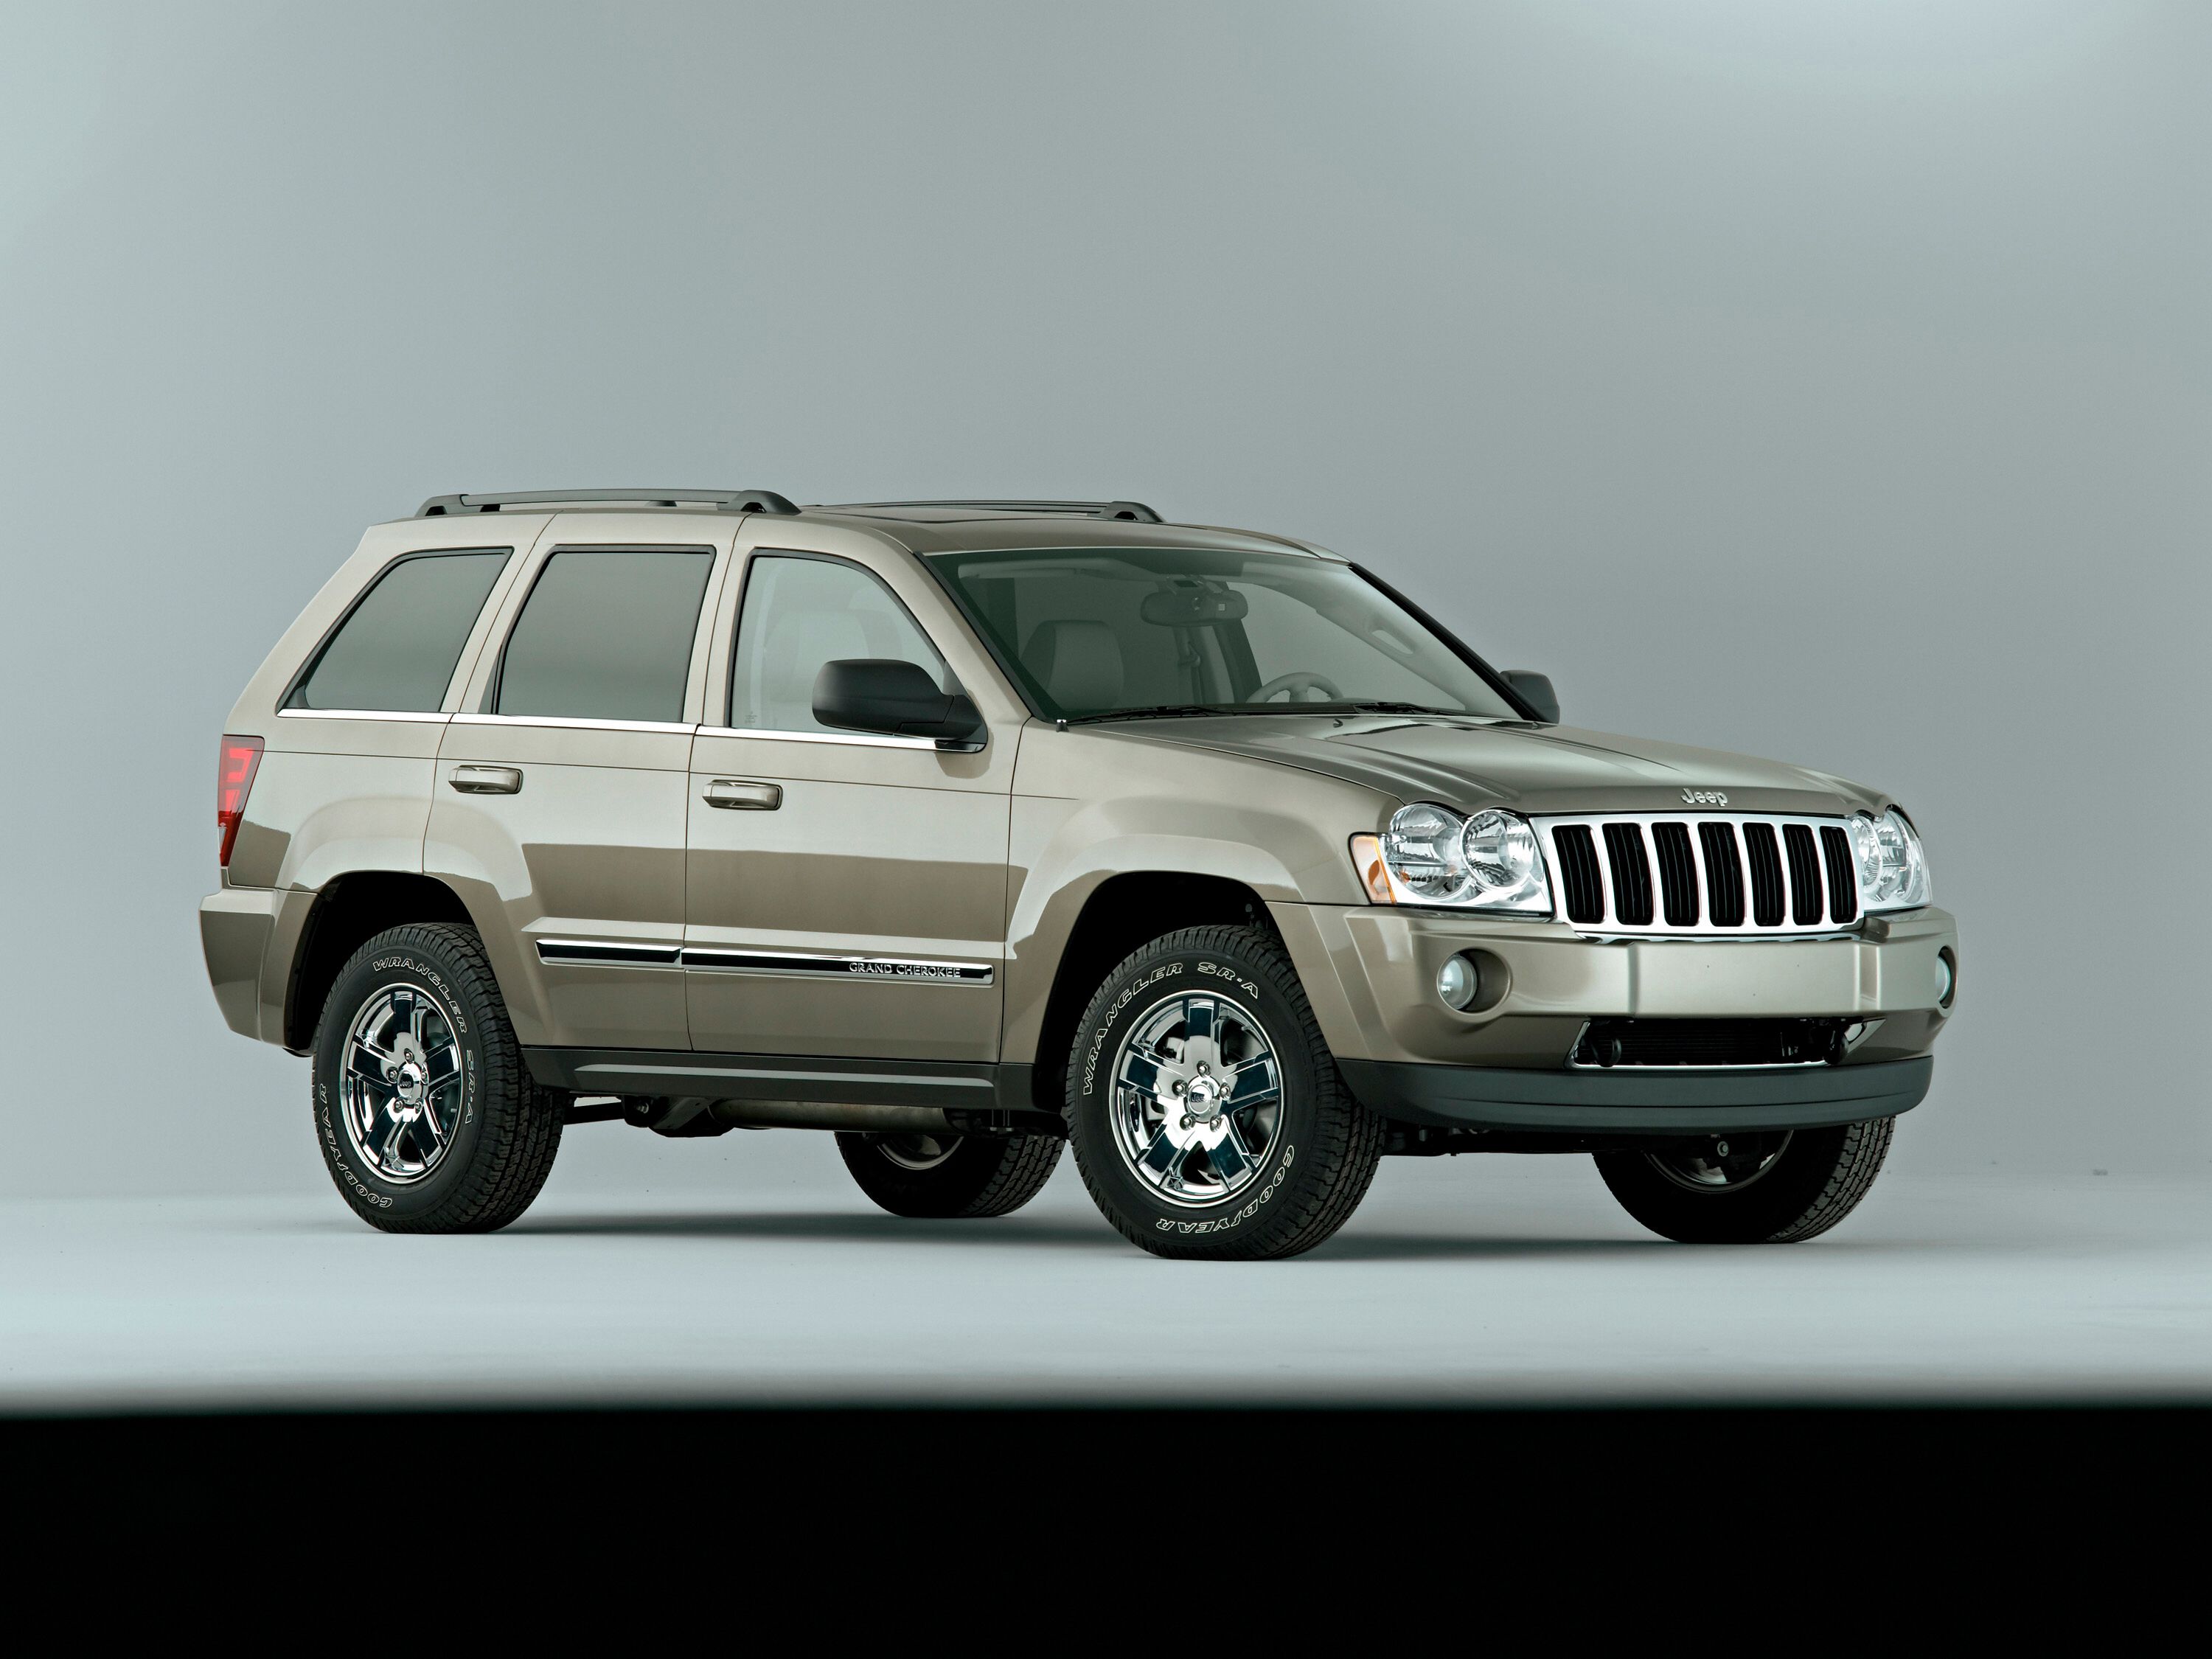 2007 Jeep Grand Cherokee Comes With A Crd Engine